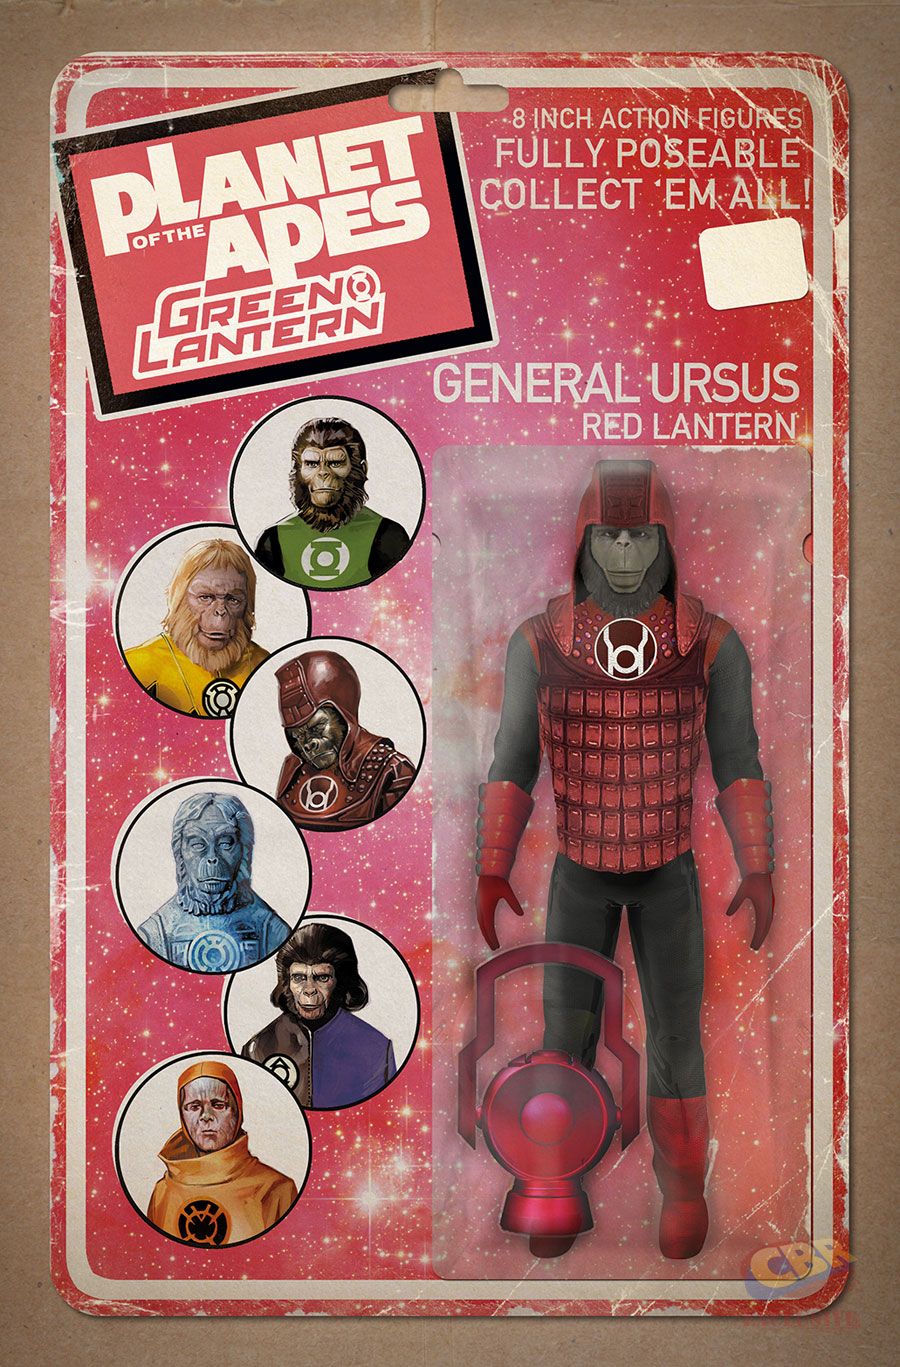 Planet of the Apes/Green Lantern #3 action figure variant